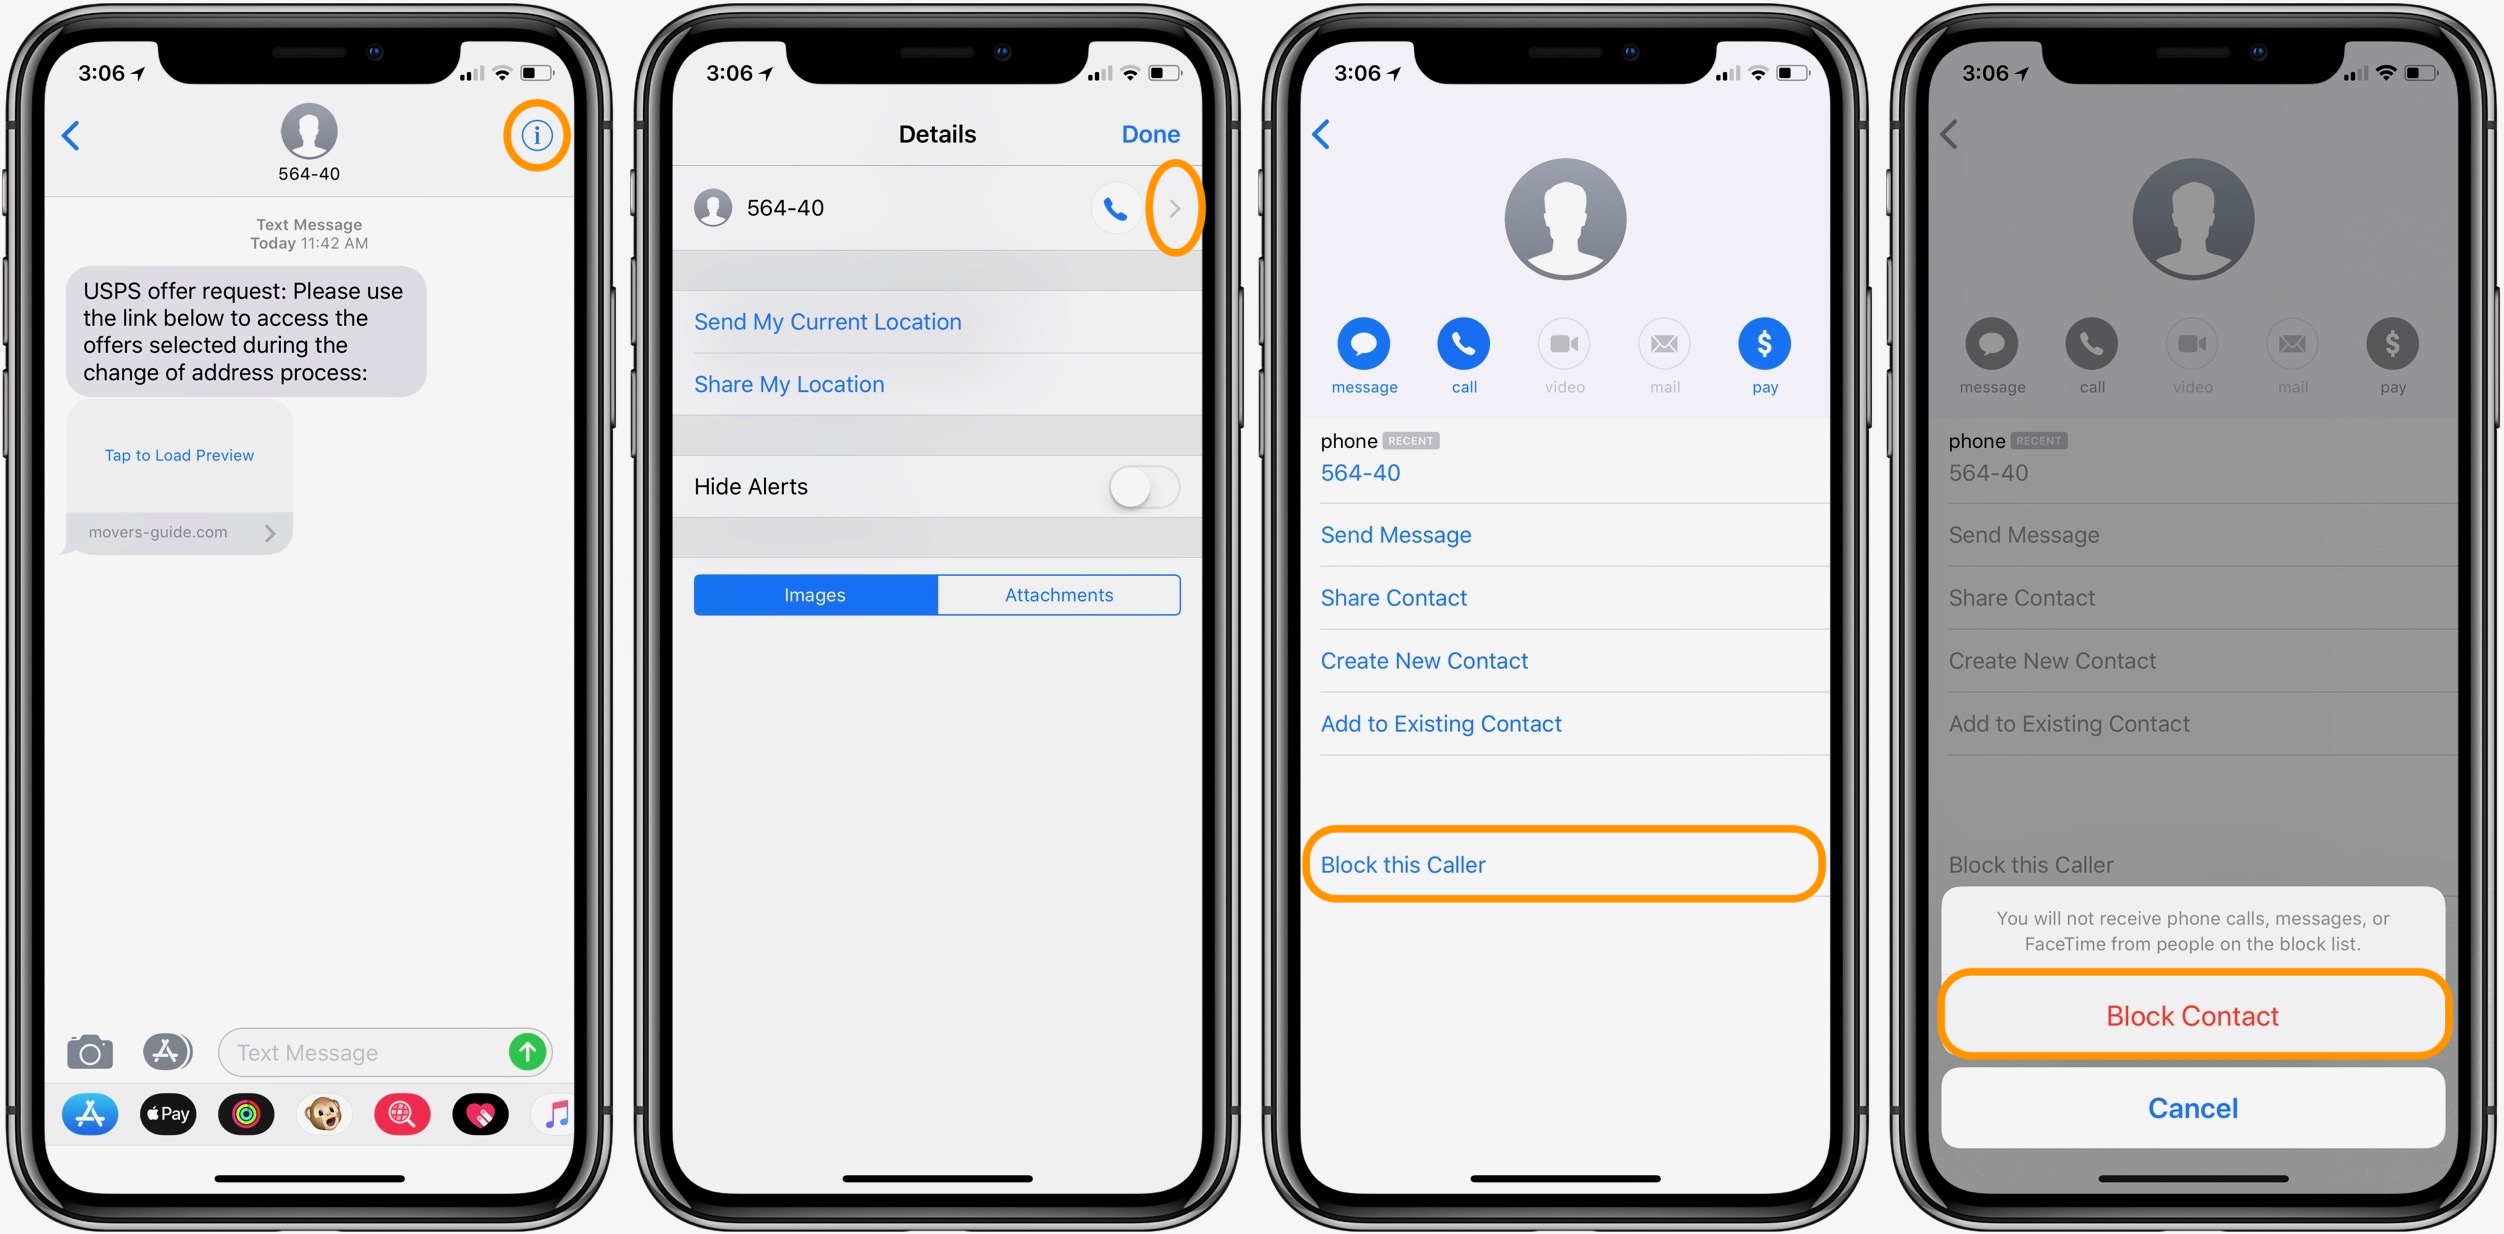 How to block texts on iPhone in iOS 13, 14, more - 9to5Mac